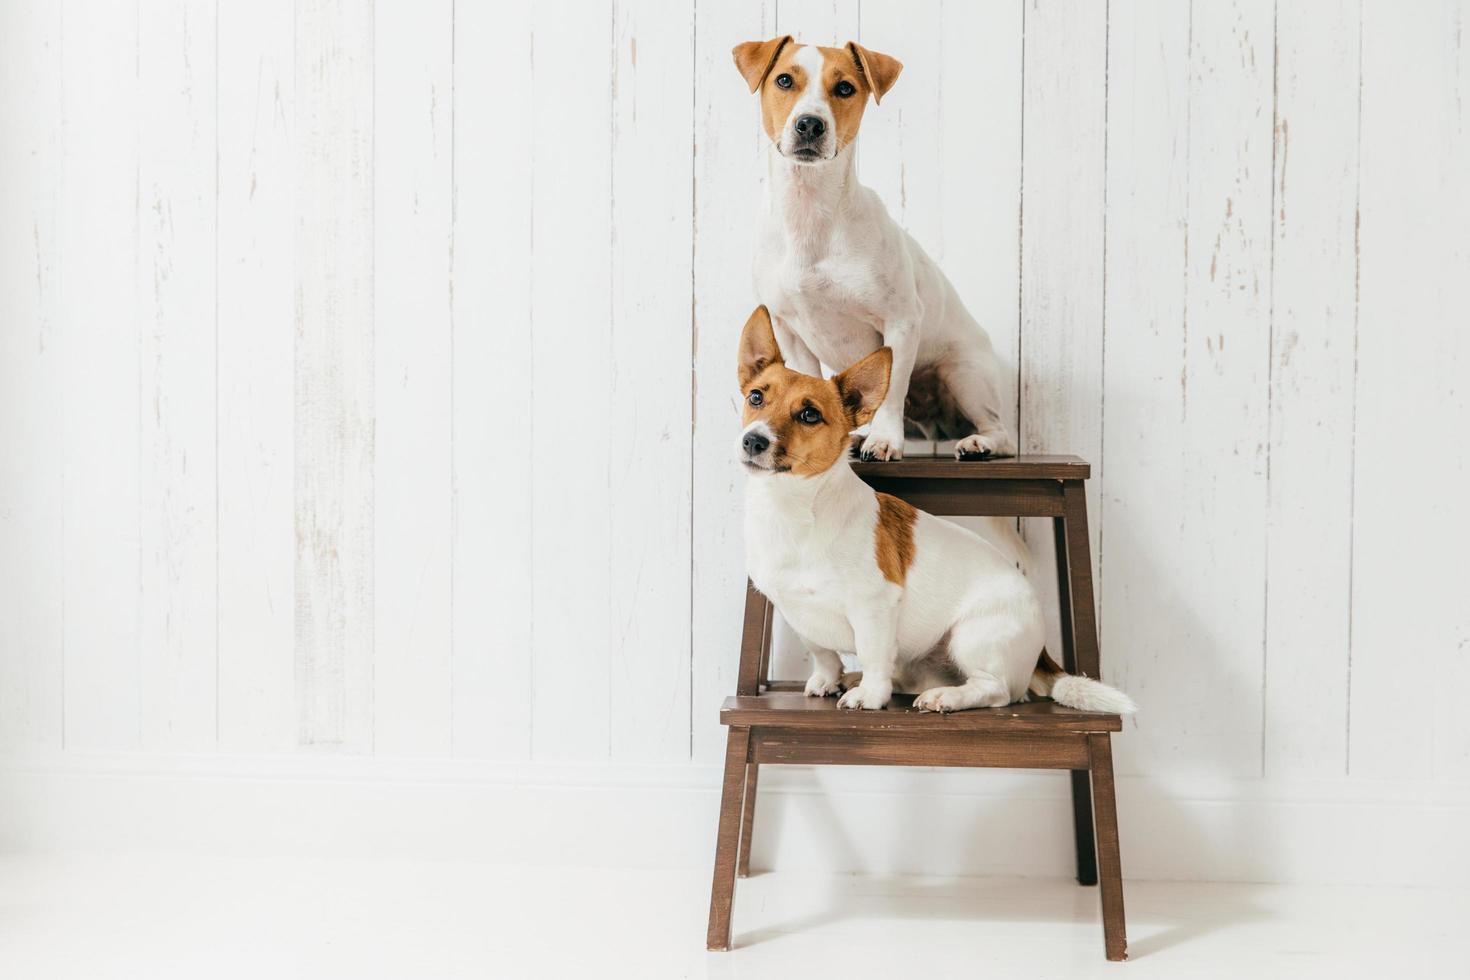 Two friendly pedigree dogs, sit on chair, isolated over white background. Jack russell terrier being trained. Domestic animals. Breed concept photo